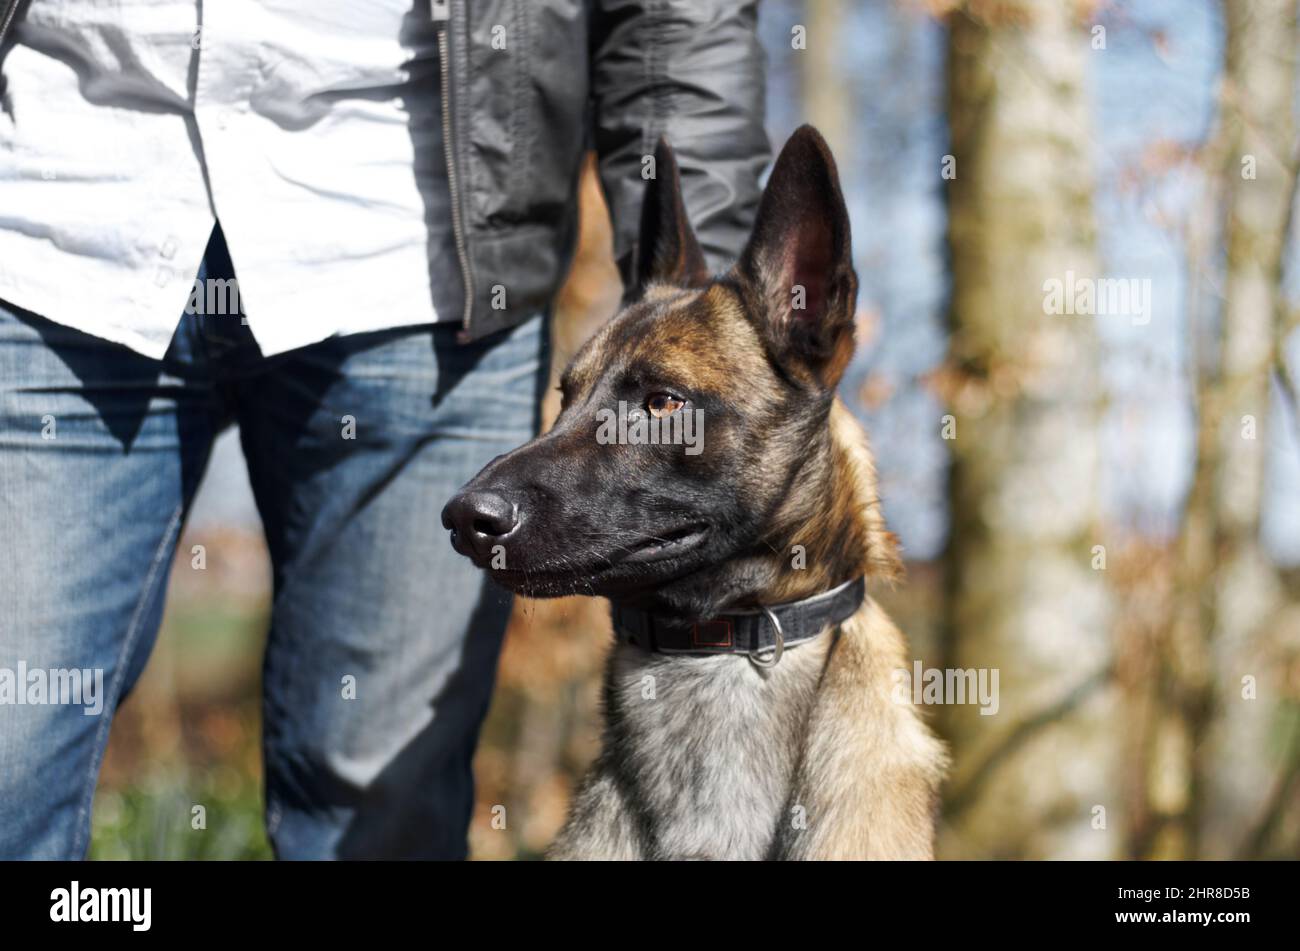 Ear on end. A dog on alert with its ears pricked up. Stock Photo